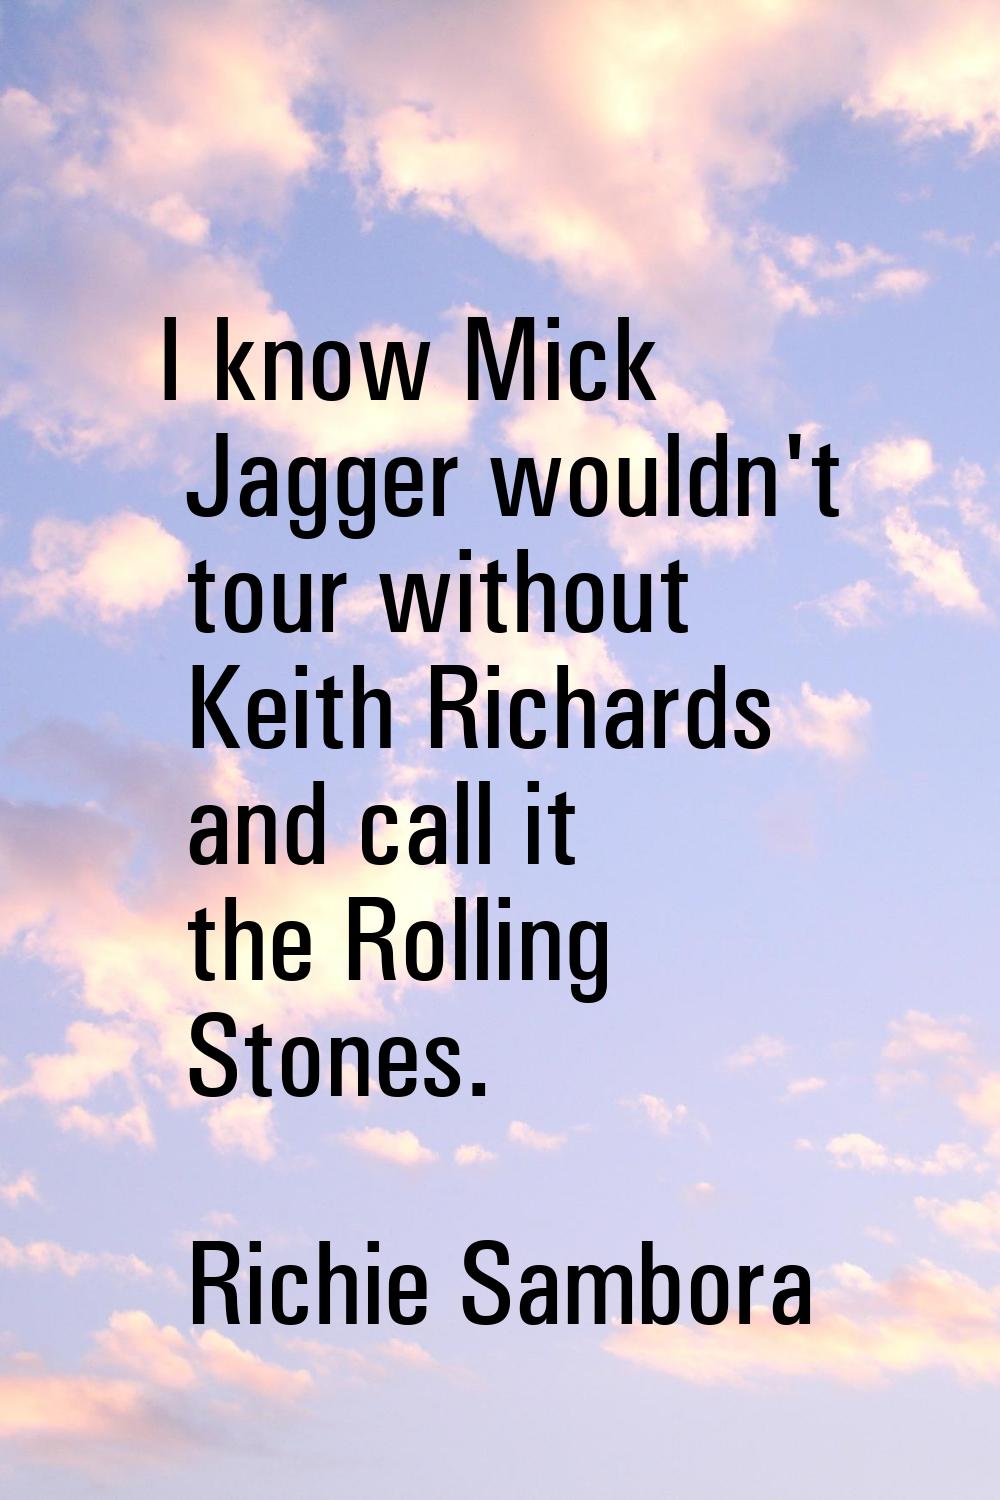 I know Mick Jagger wouldn't tour without Keith Richards and call it the Rolling Stones.